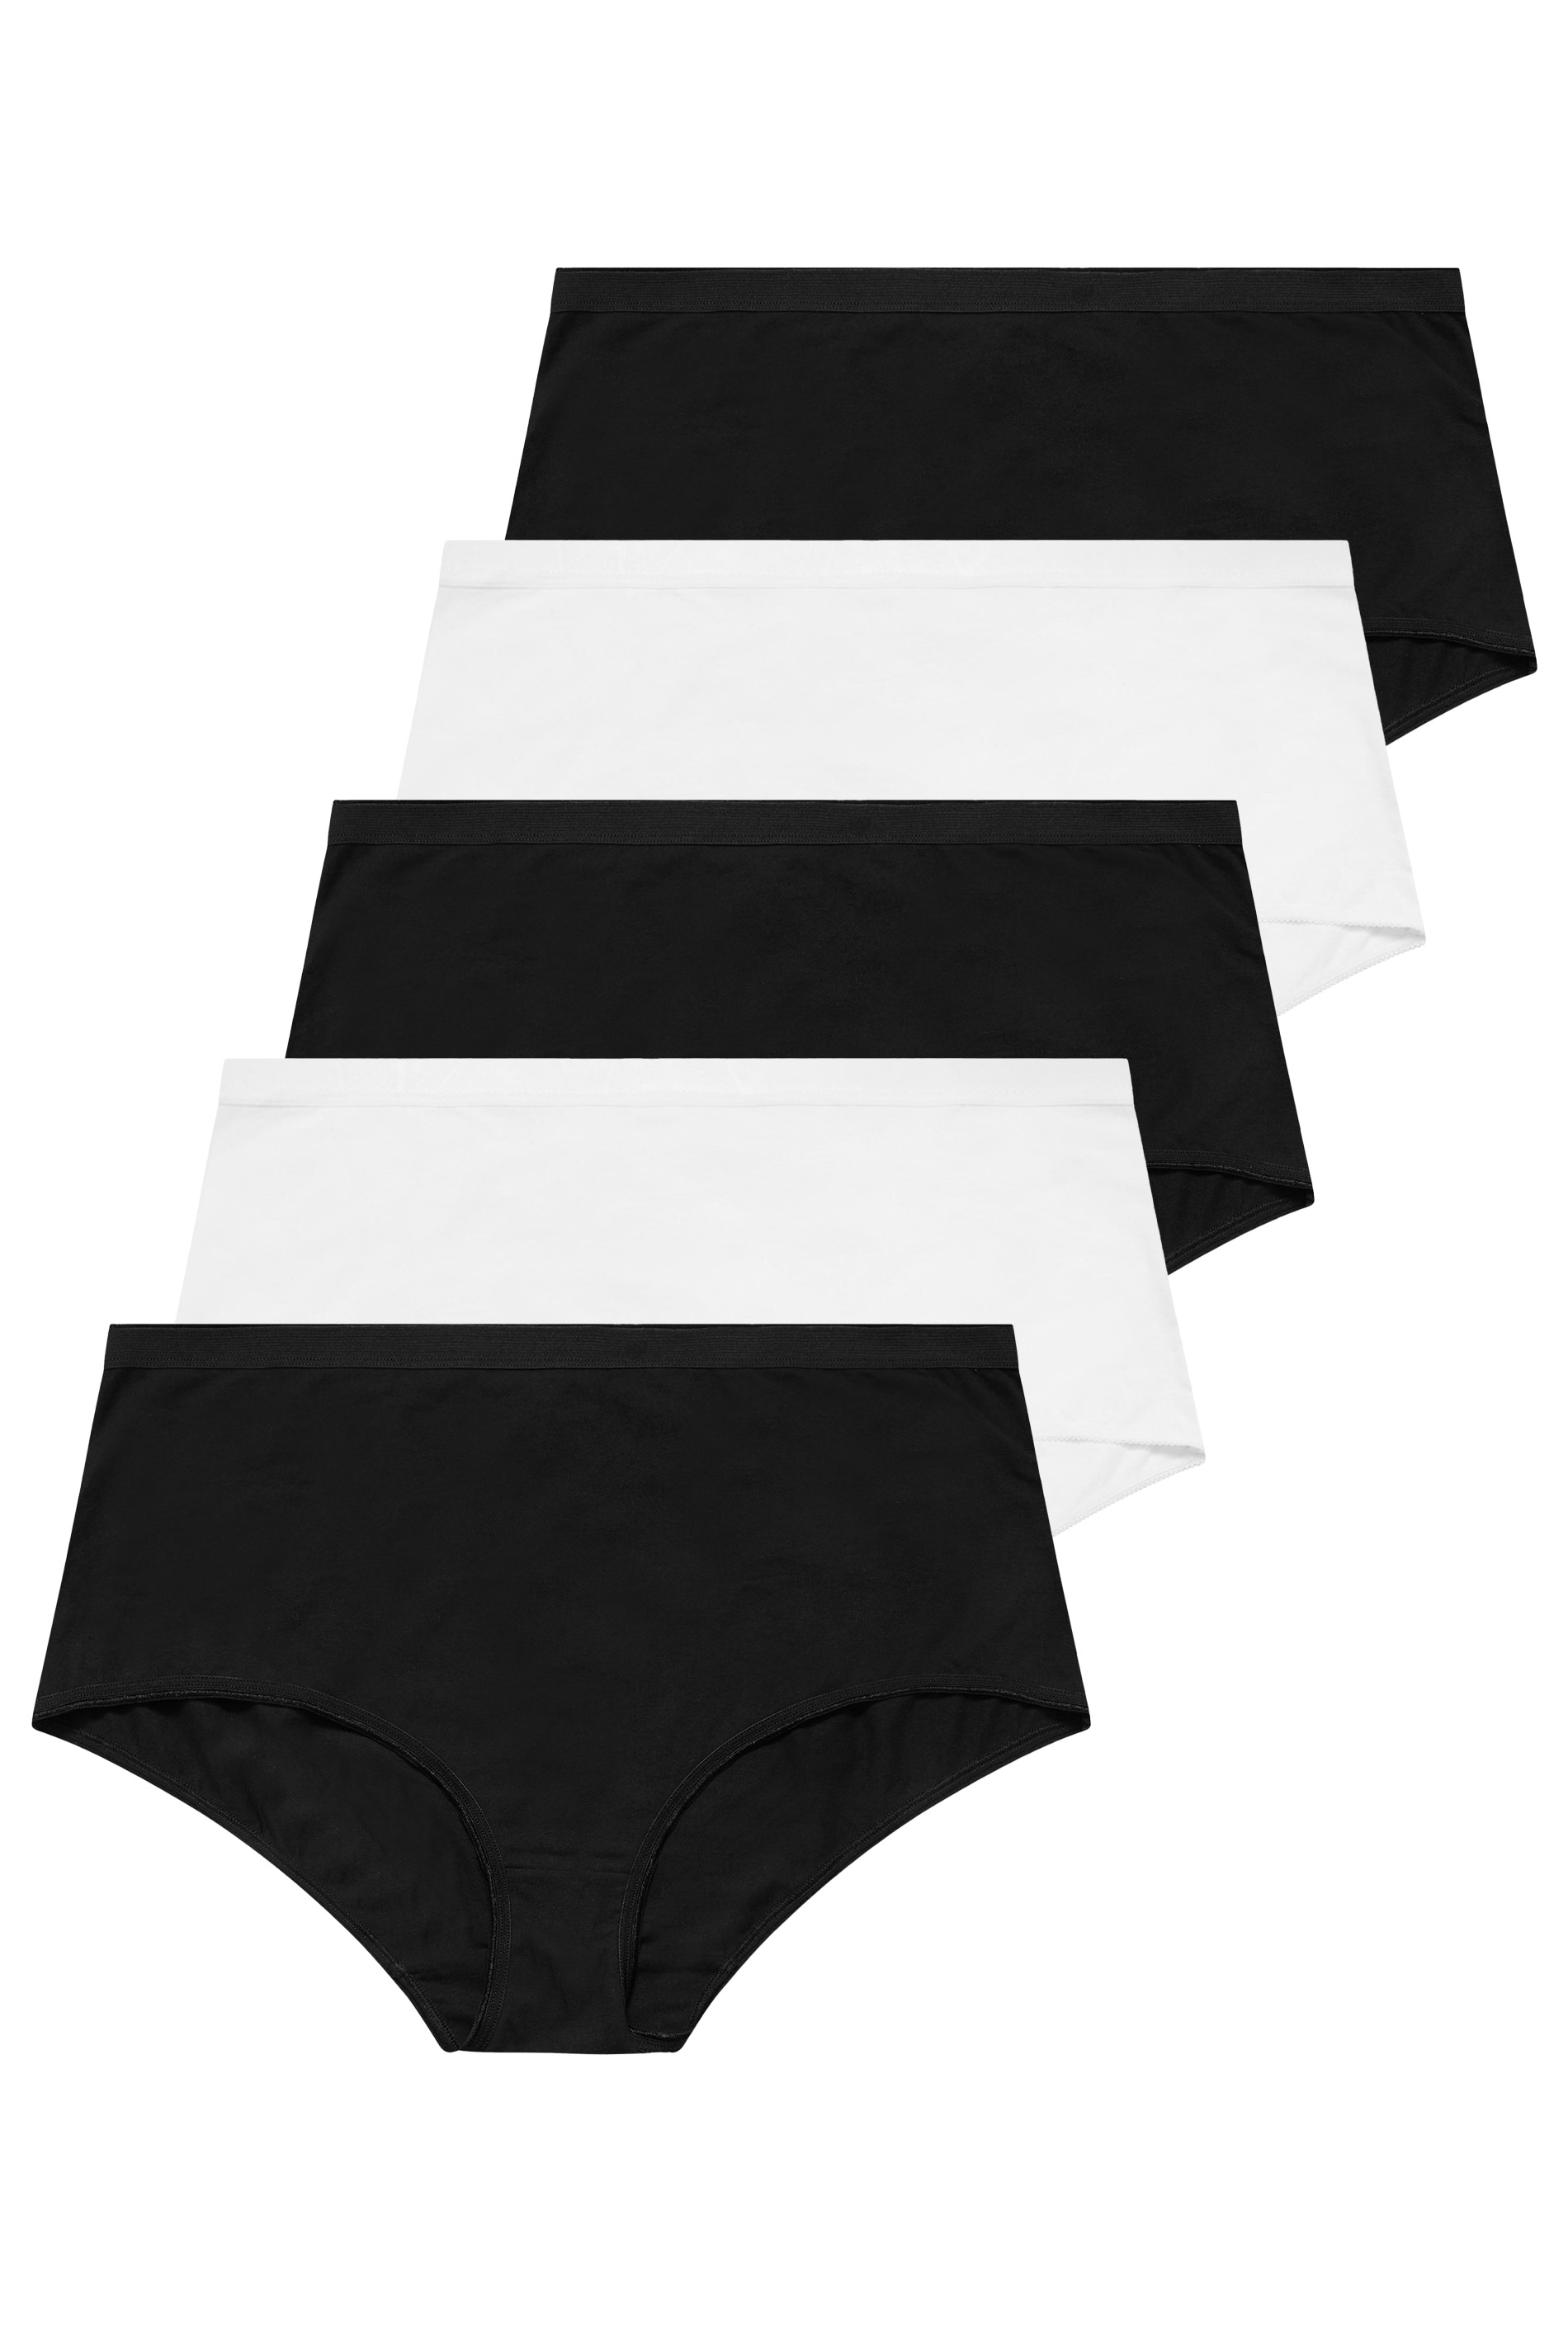 YOURS 5 PACK Plus Size Black & White Full Briefs | Yours Clothing 3